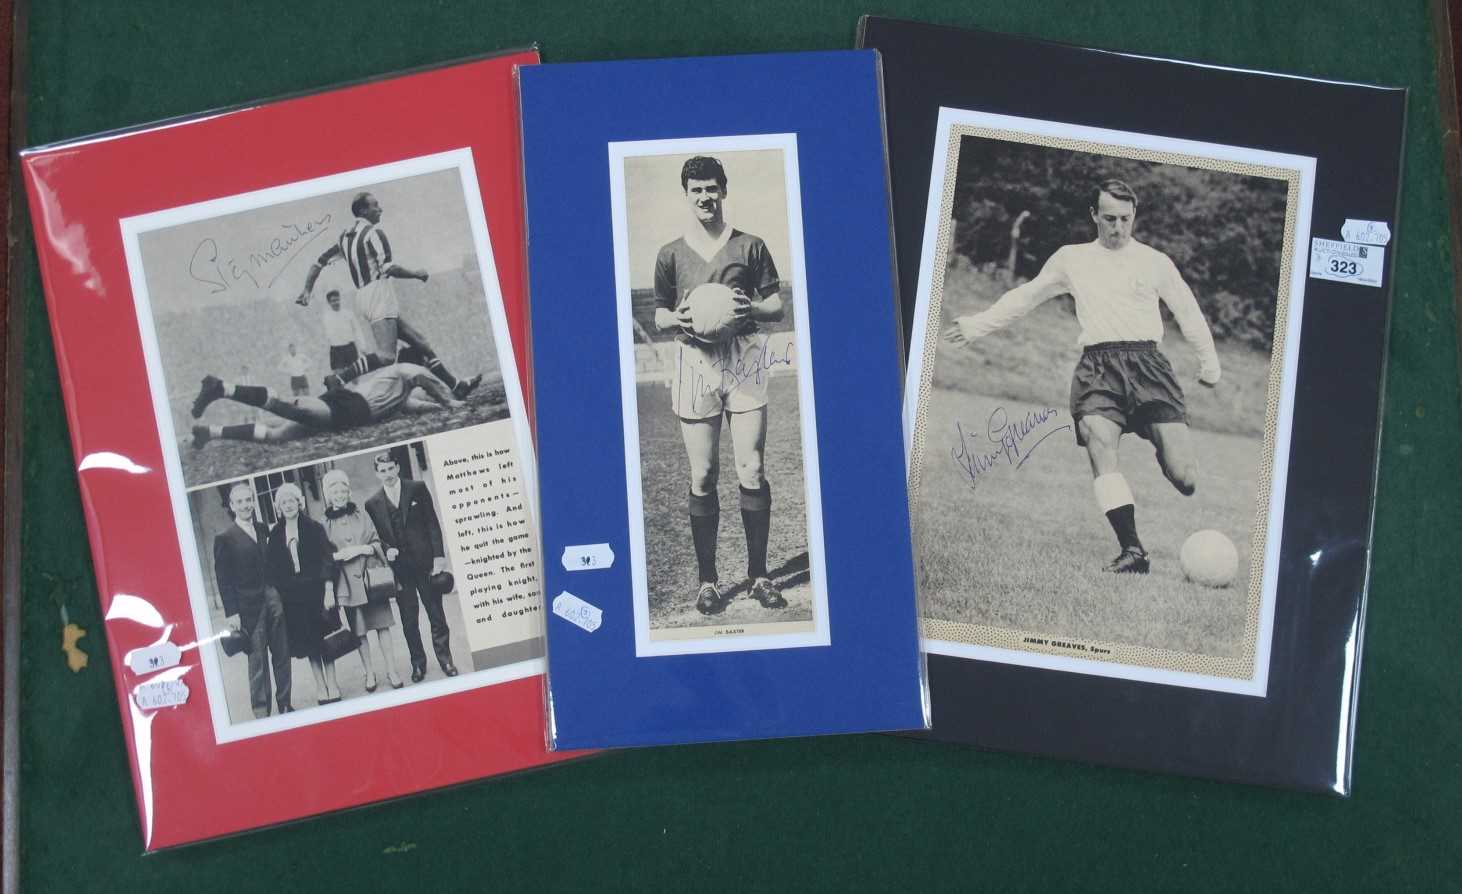 Stanley Matthews, Jimmy Greaves and Jim Baxter Autographs, (unverified) each on an image of